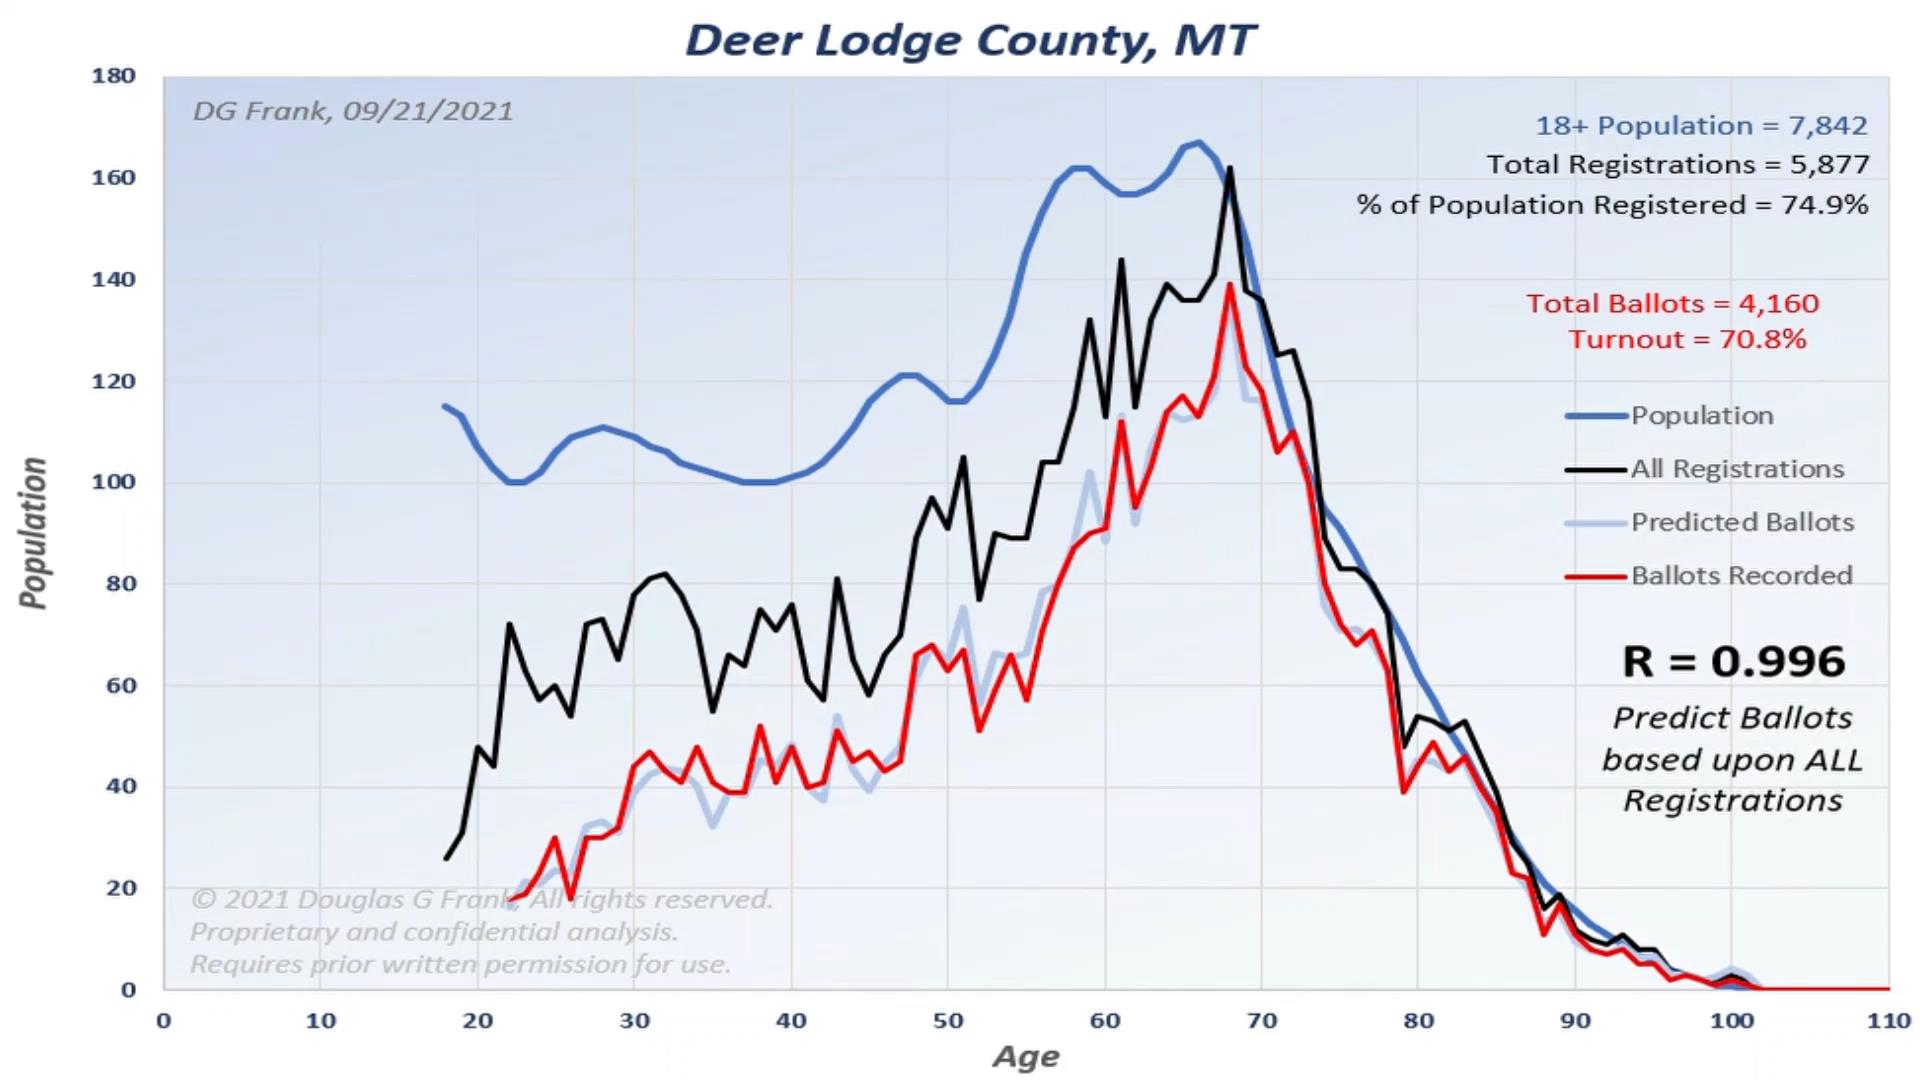 Deer Lodge County 2020 Election Analysis Chart by Dr. Doug Frank